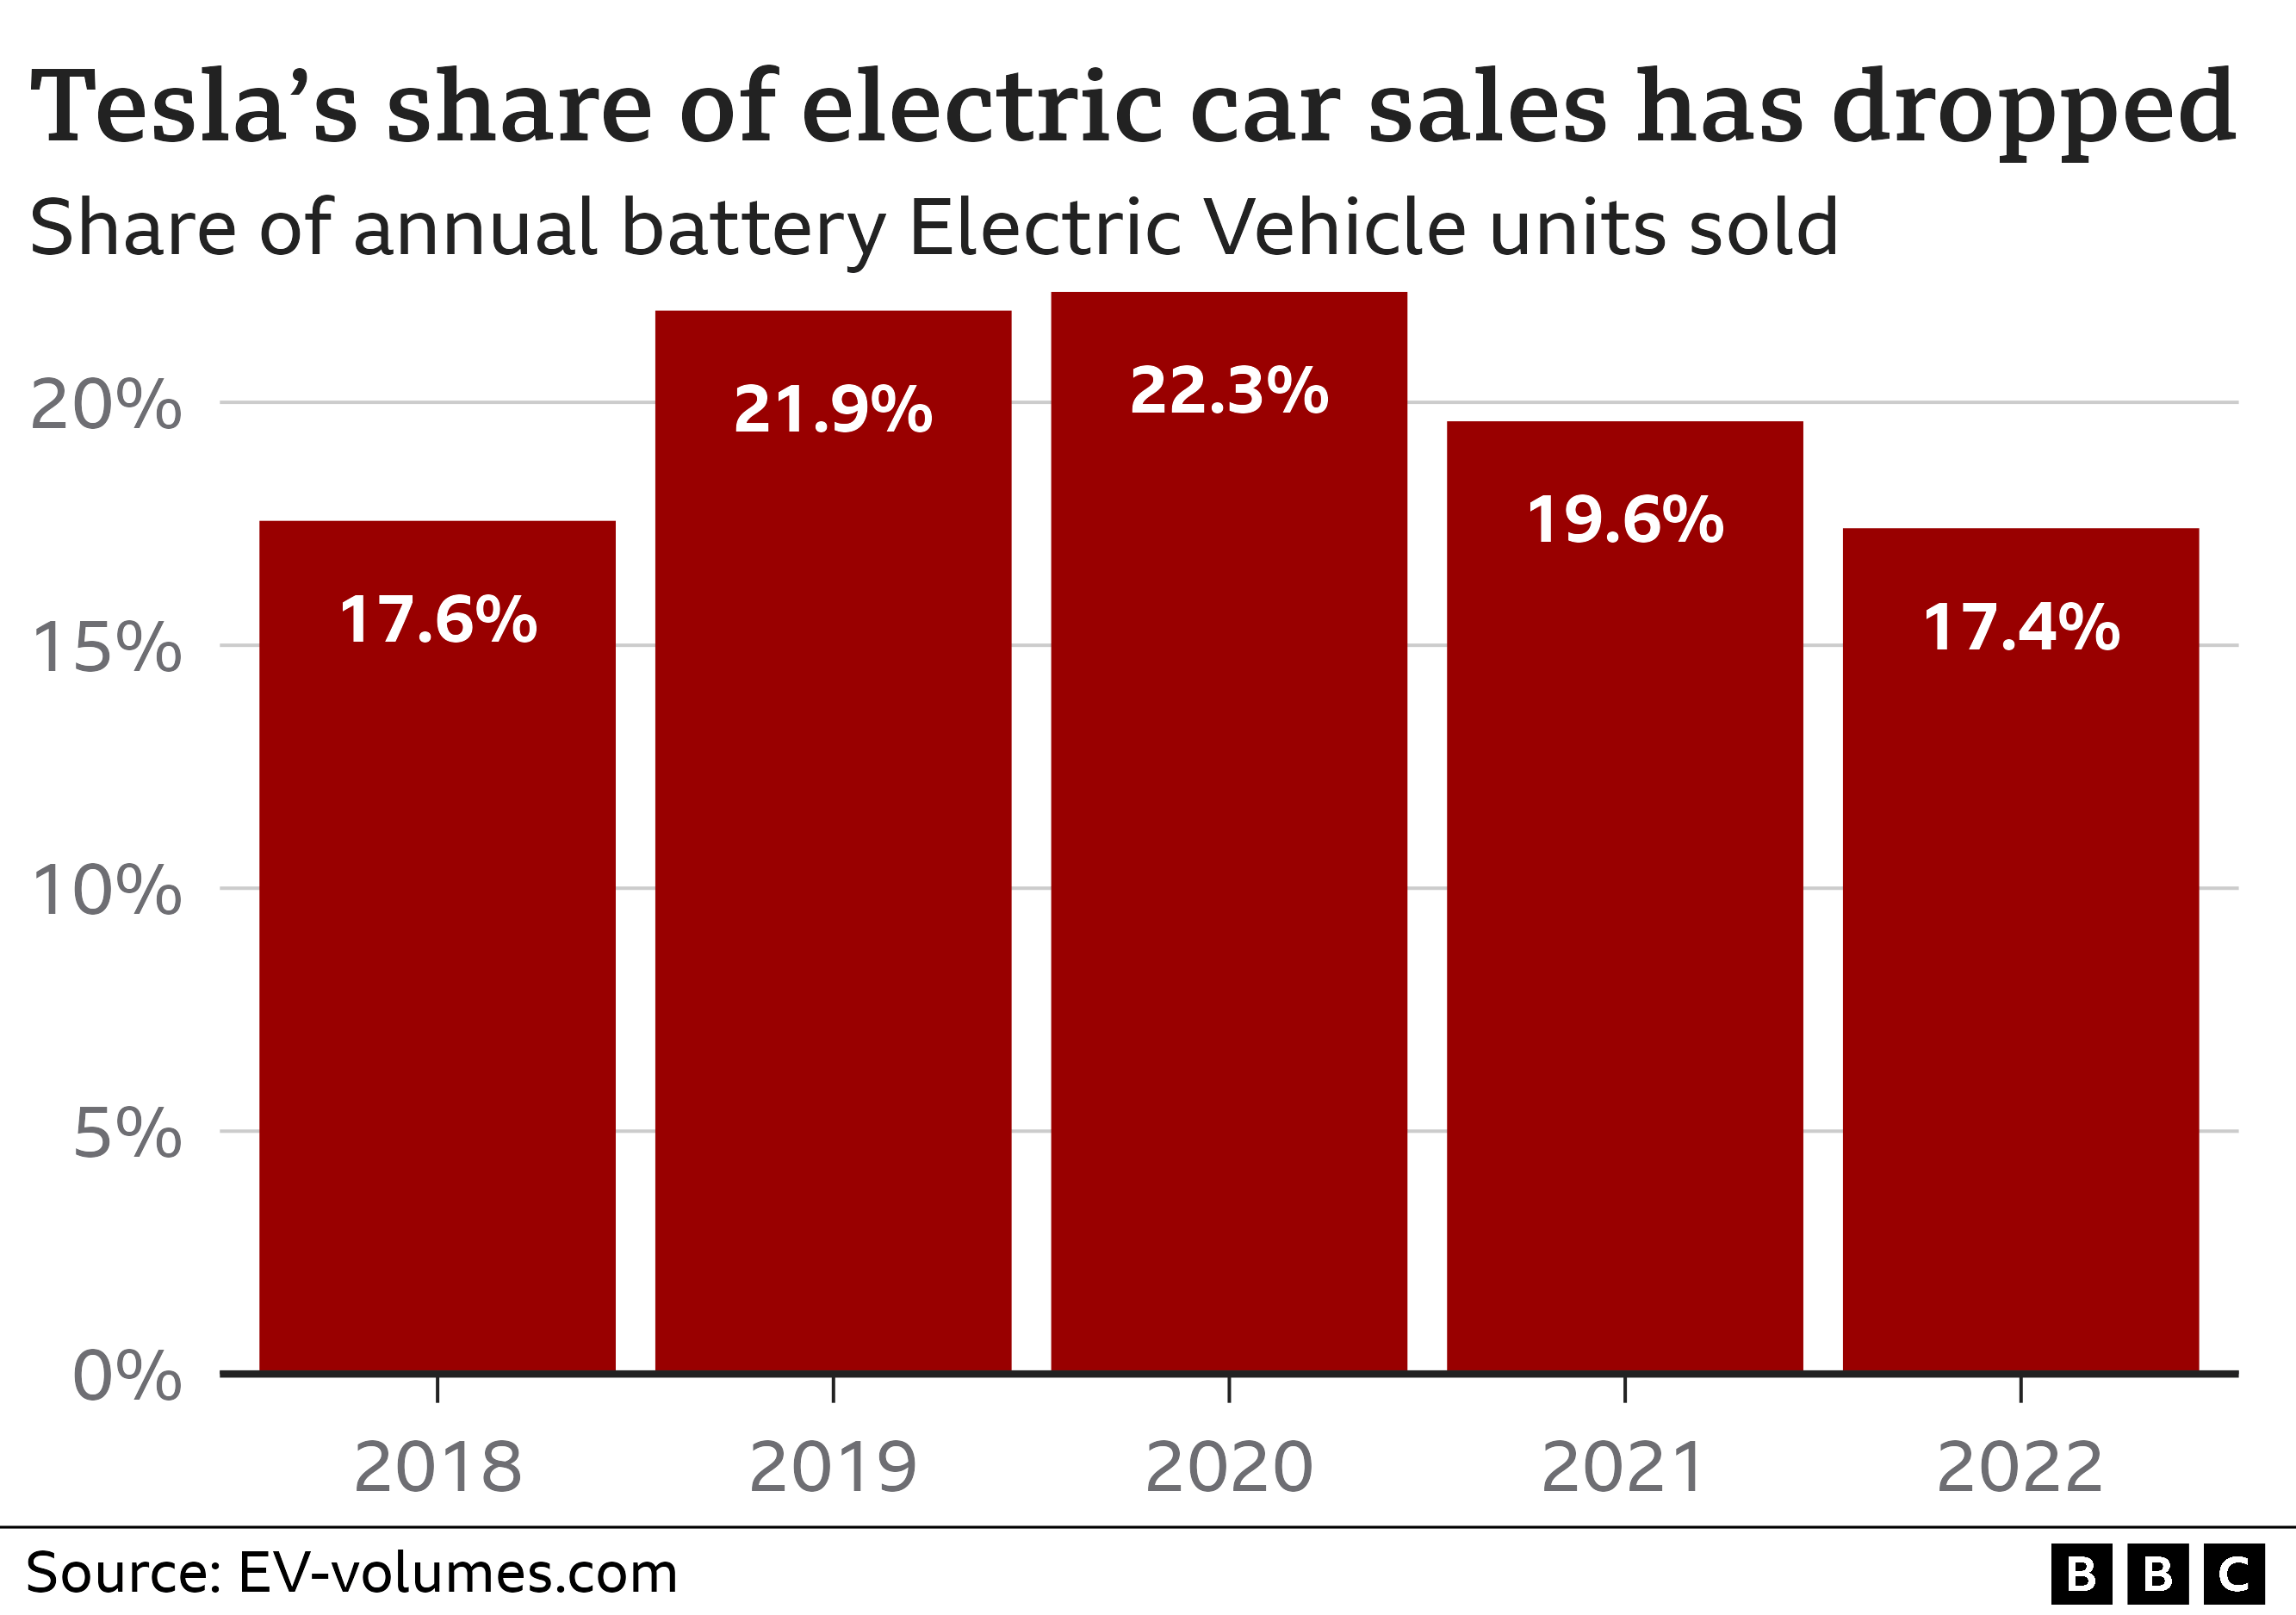 Bar chart showing Tesla's share of the Battery Electric Vehicles market declining from 22.3% in 2020 to 17.4% in 2022